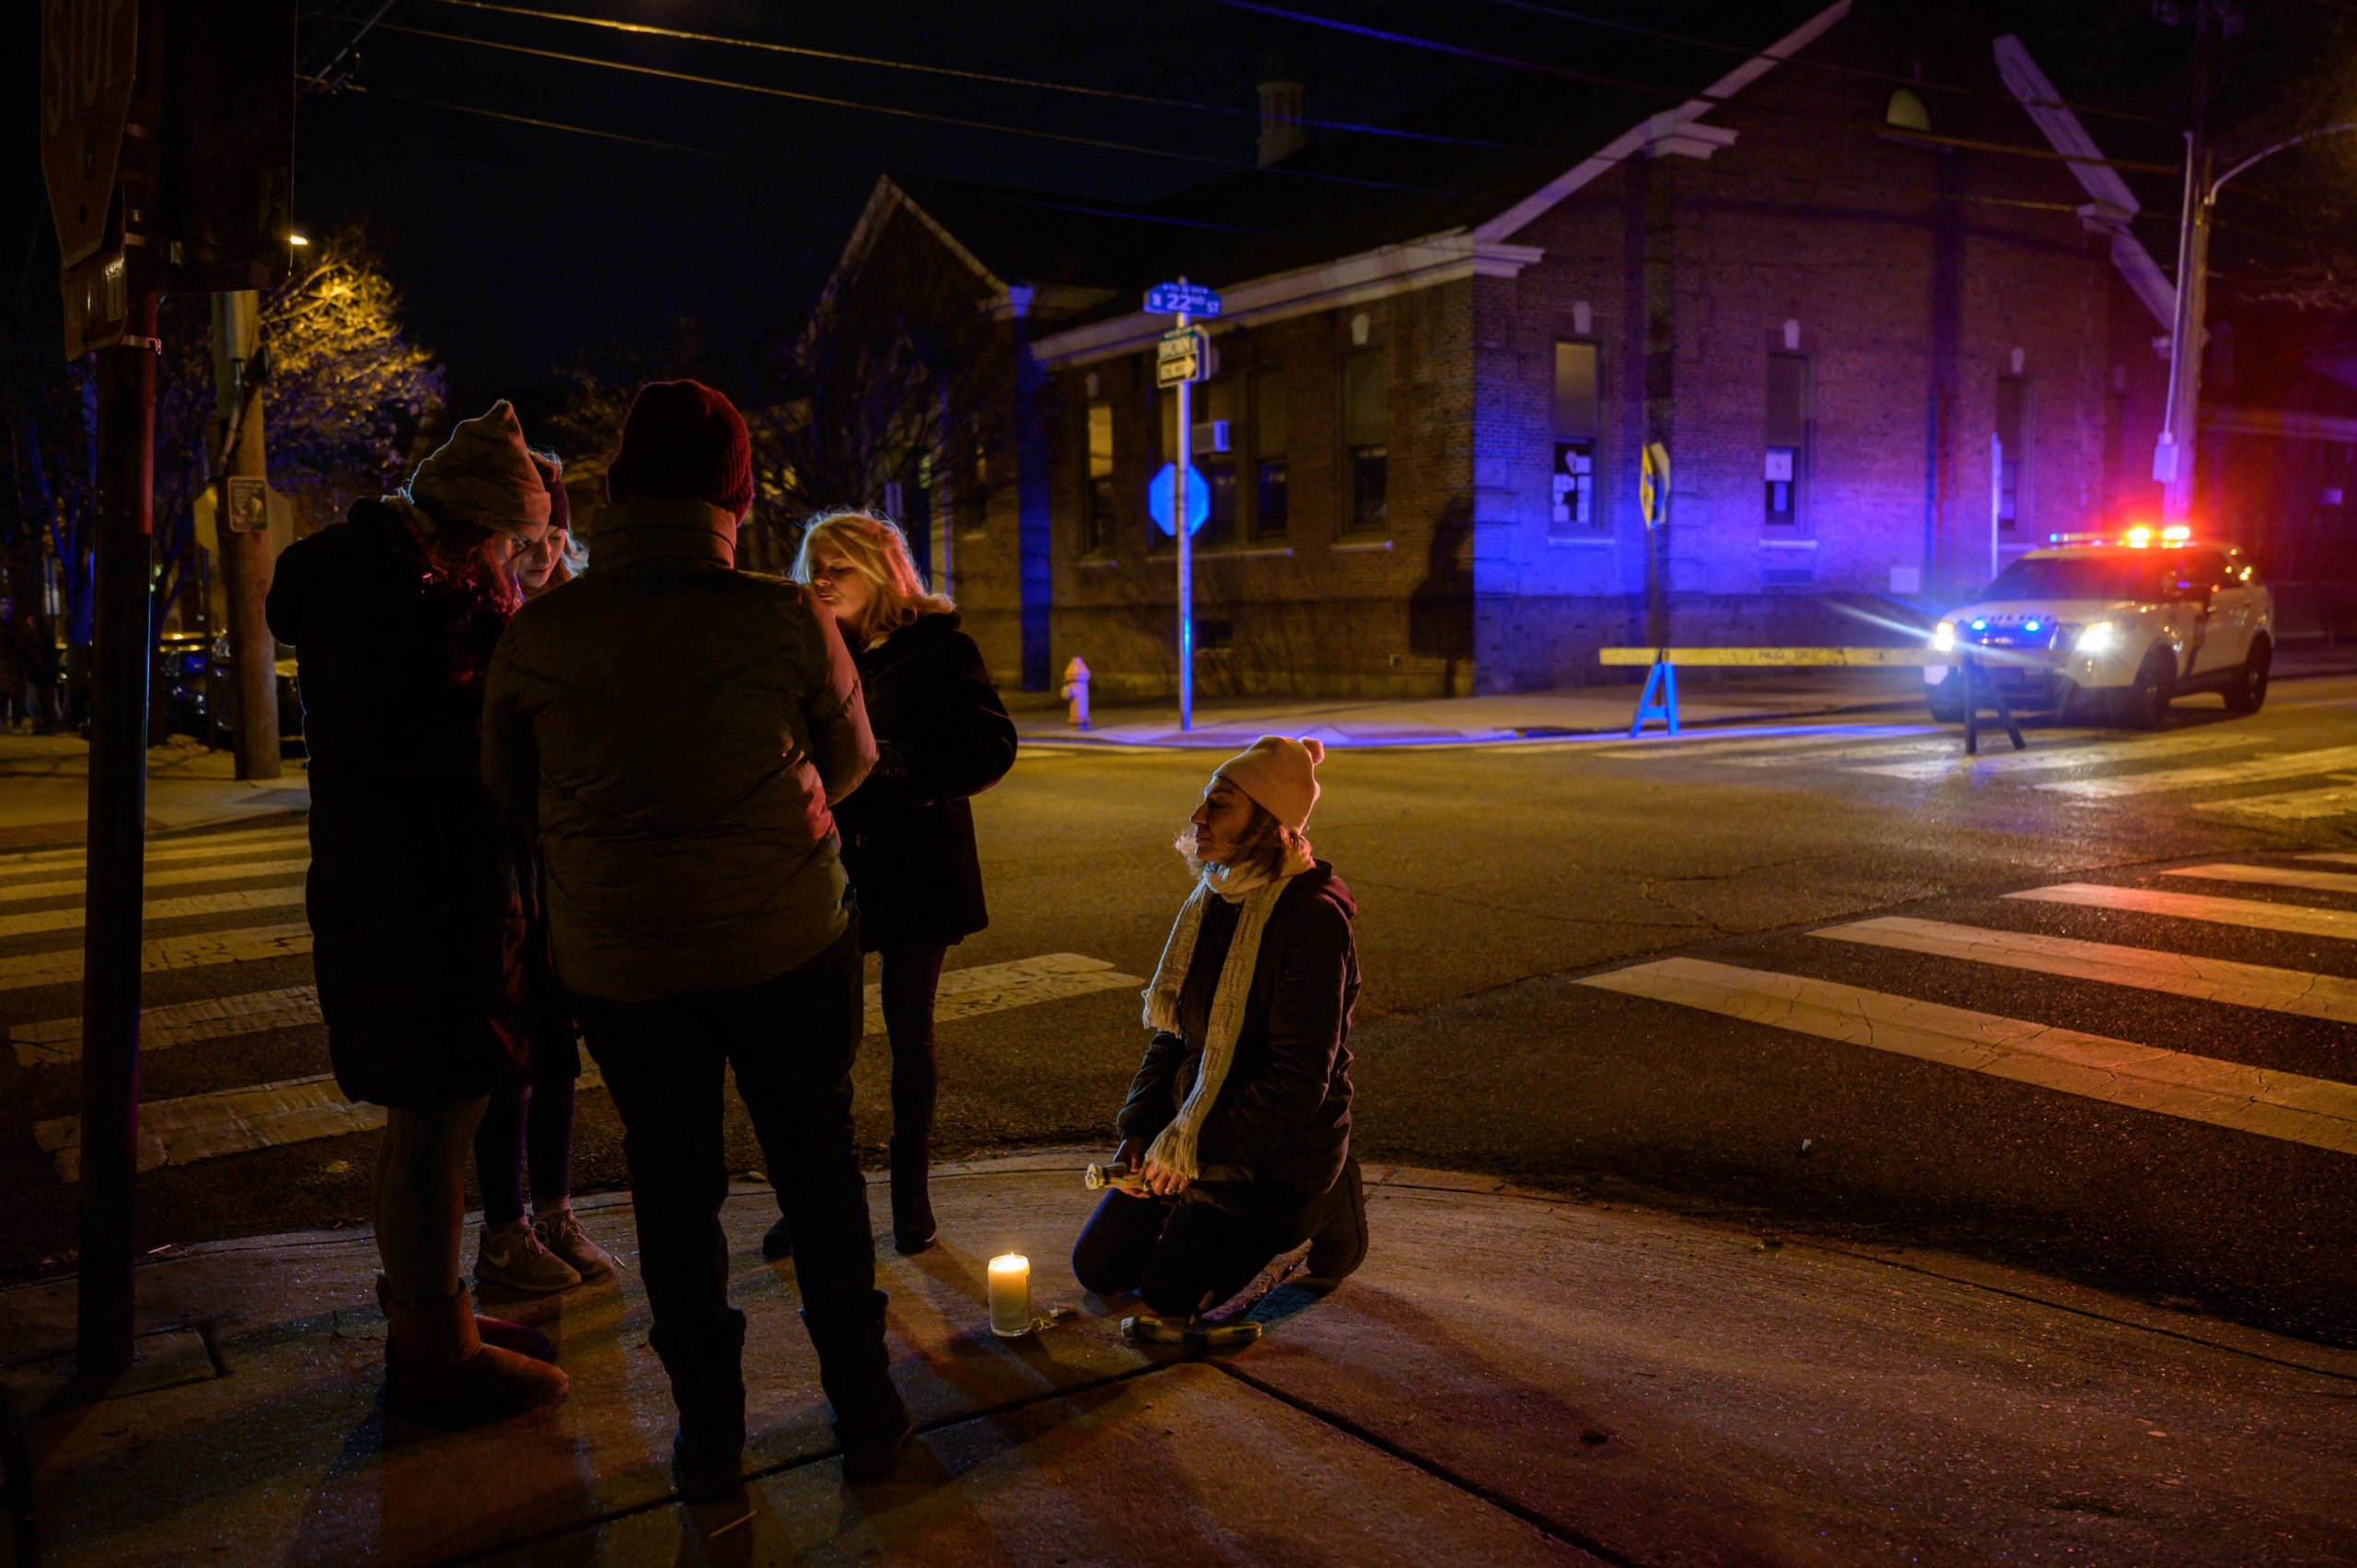 People hold a candlelight vigil near the scene of a deadly fire on January 5, 2022, in Philadelphia's popular museum district of Fairmount. (Photo by ED JONES/AFP via Getty Images)